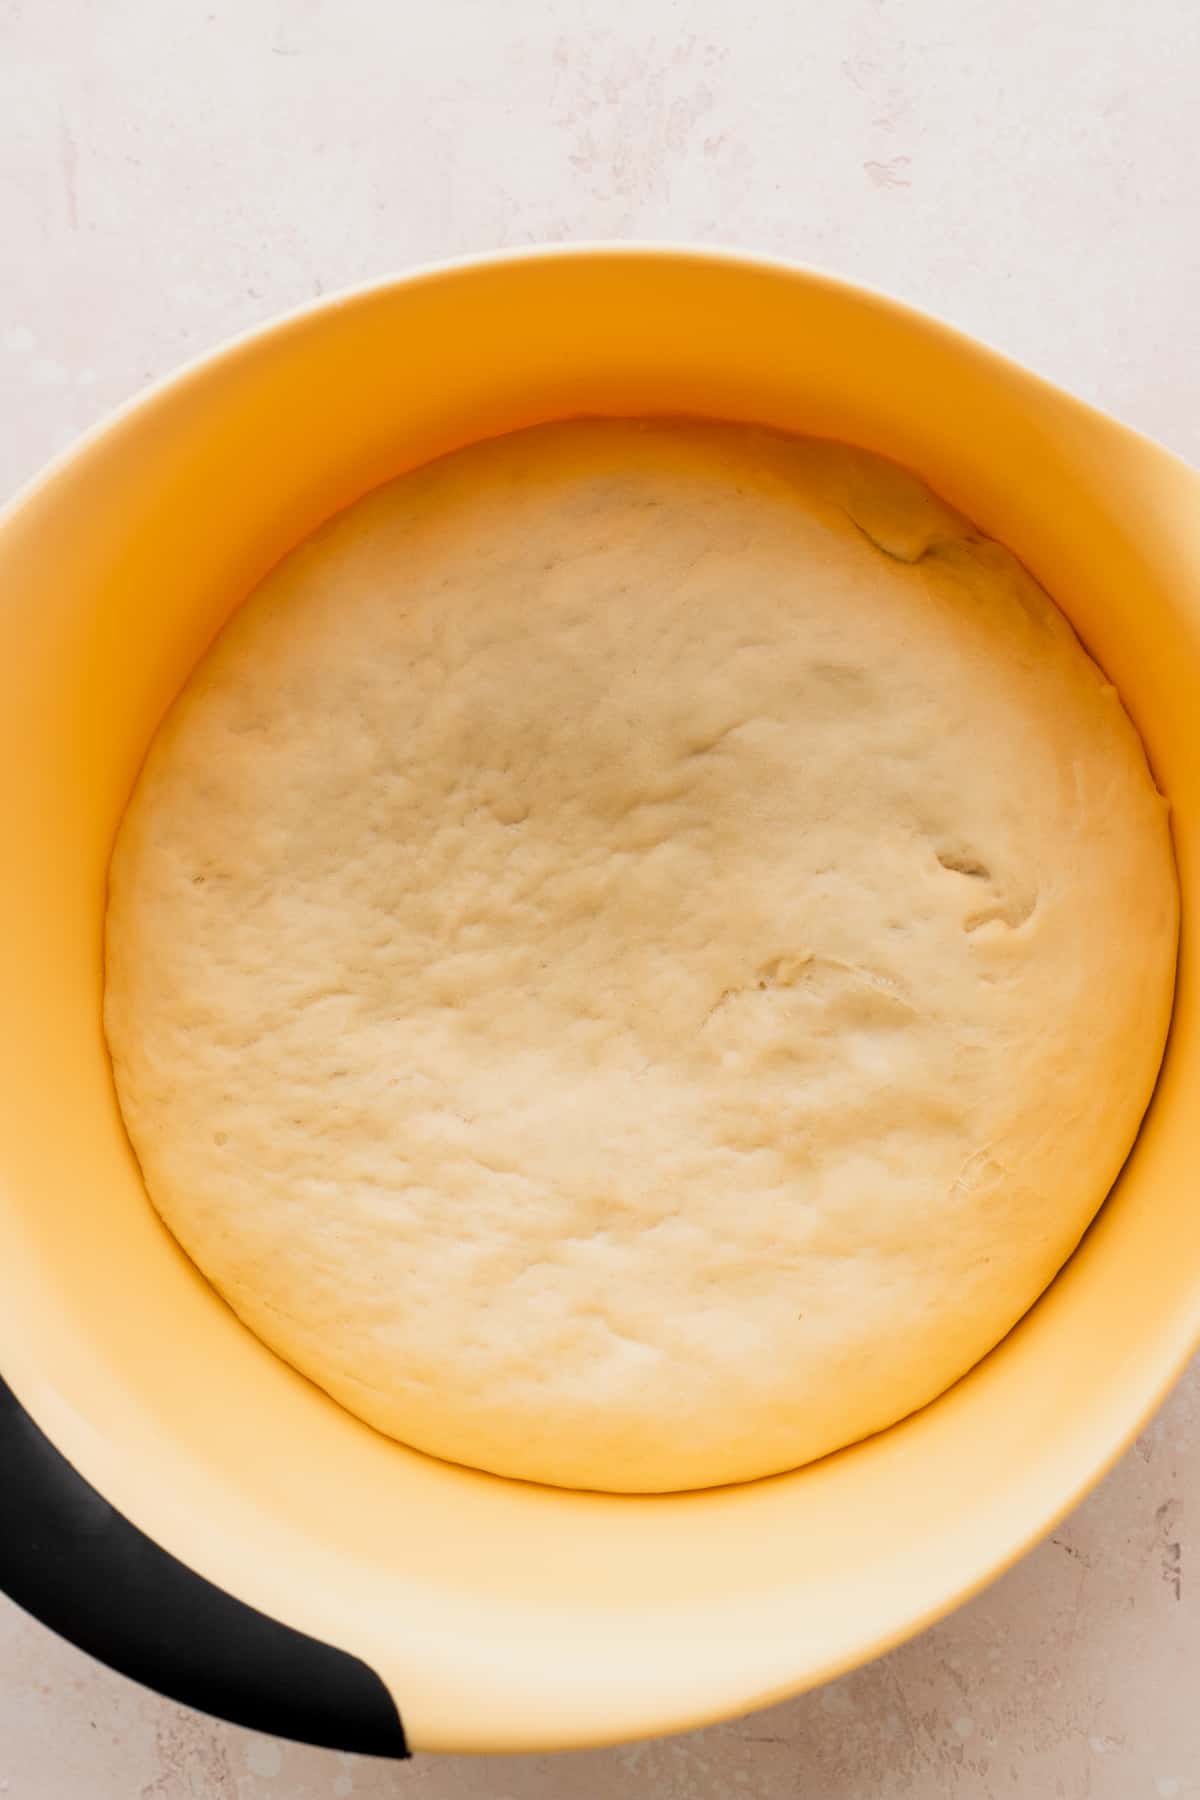 Dough after rising in a yellow bowl.